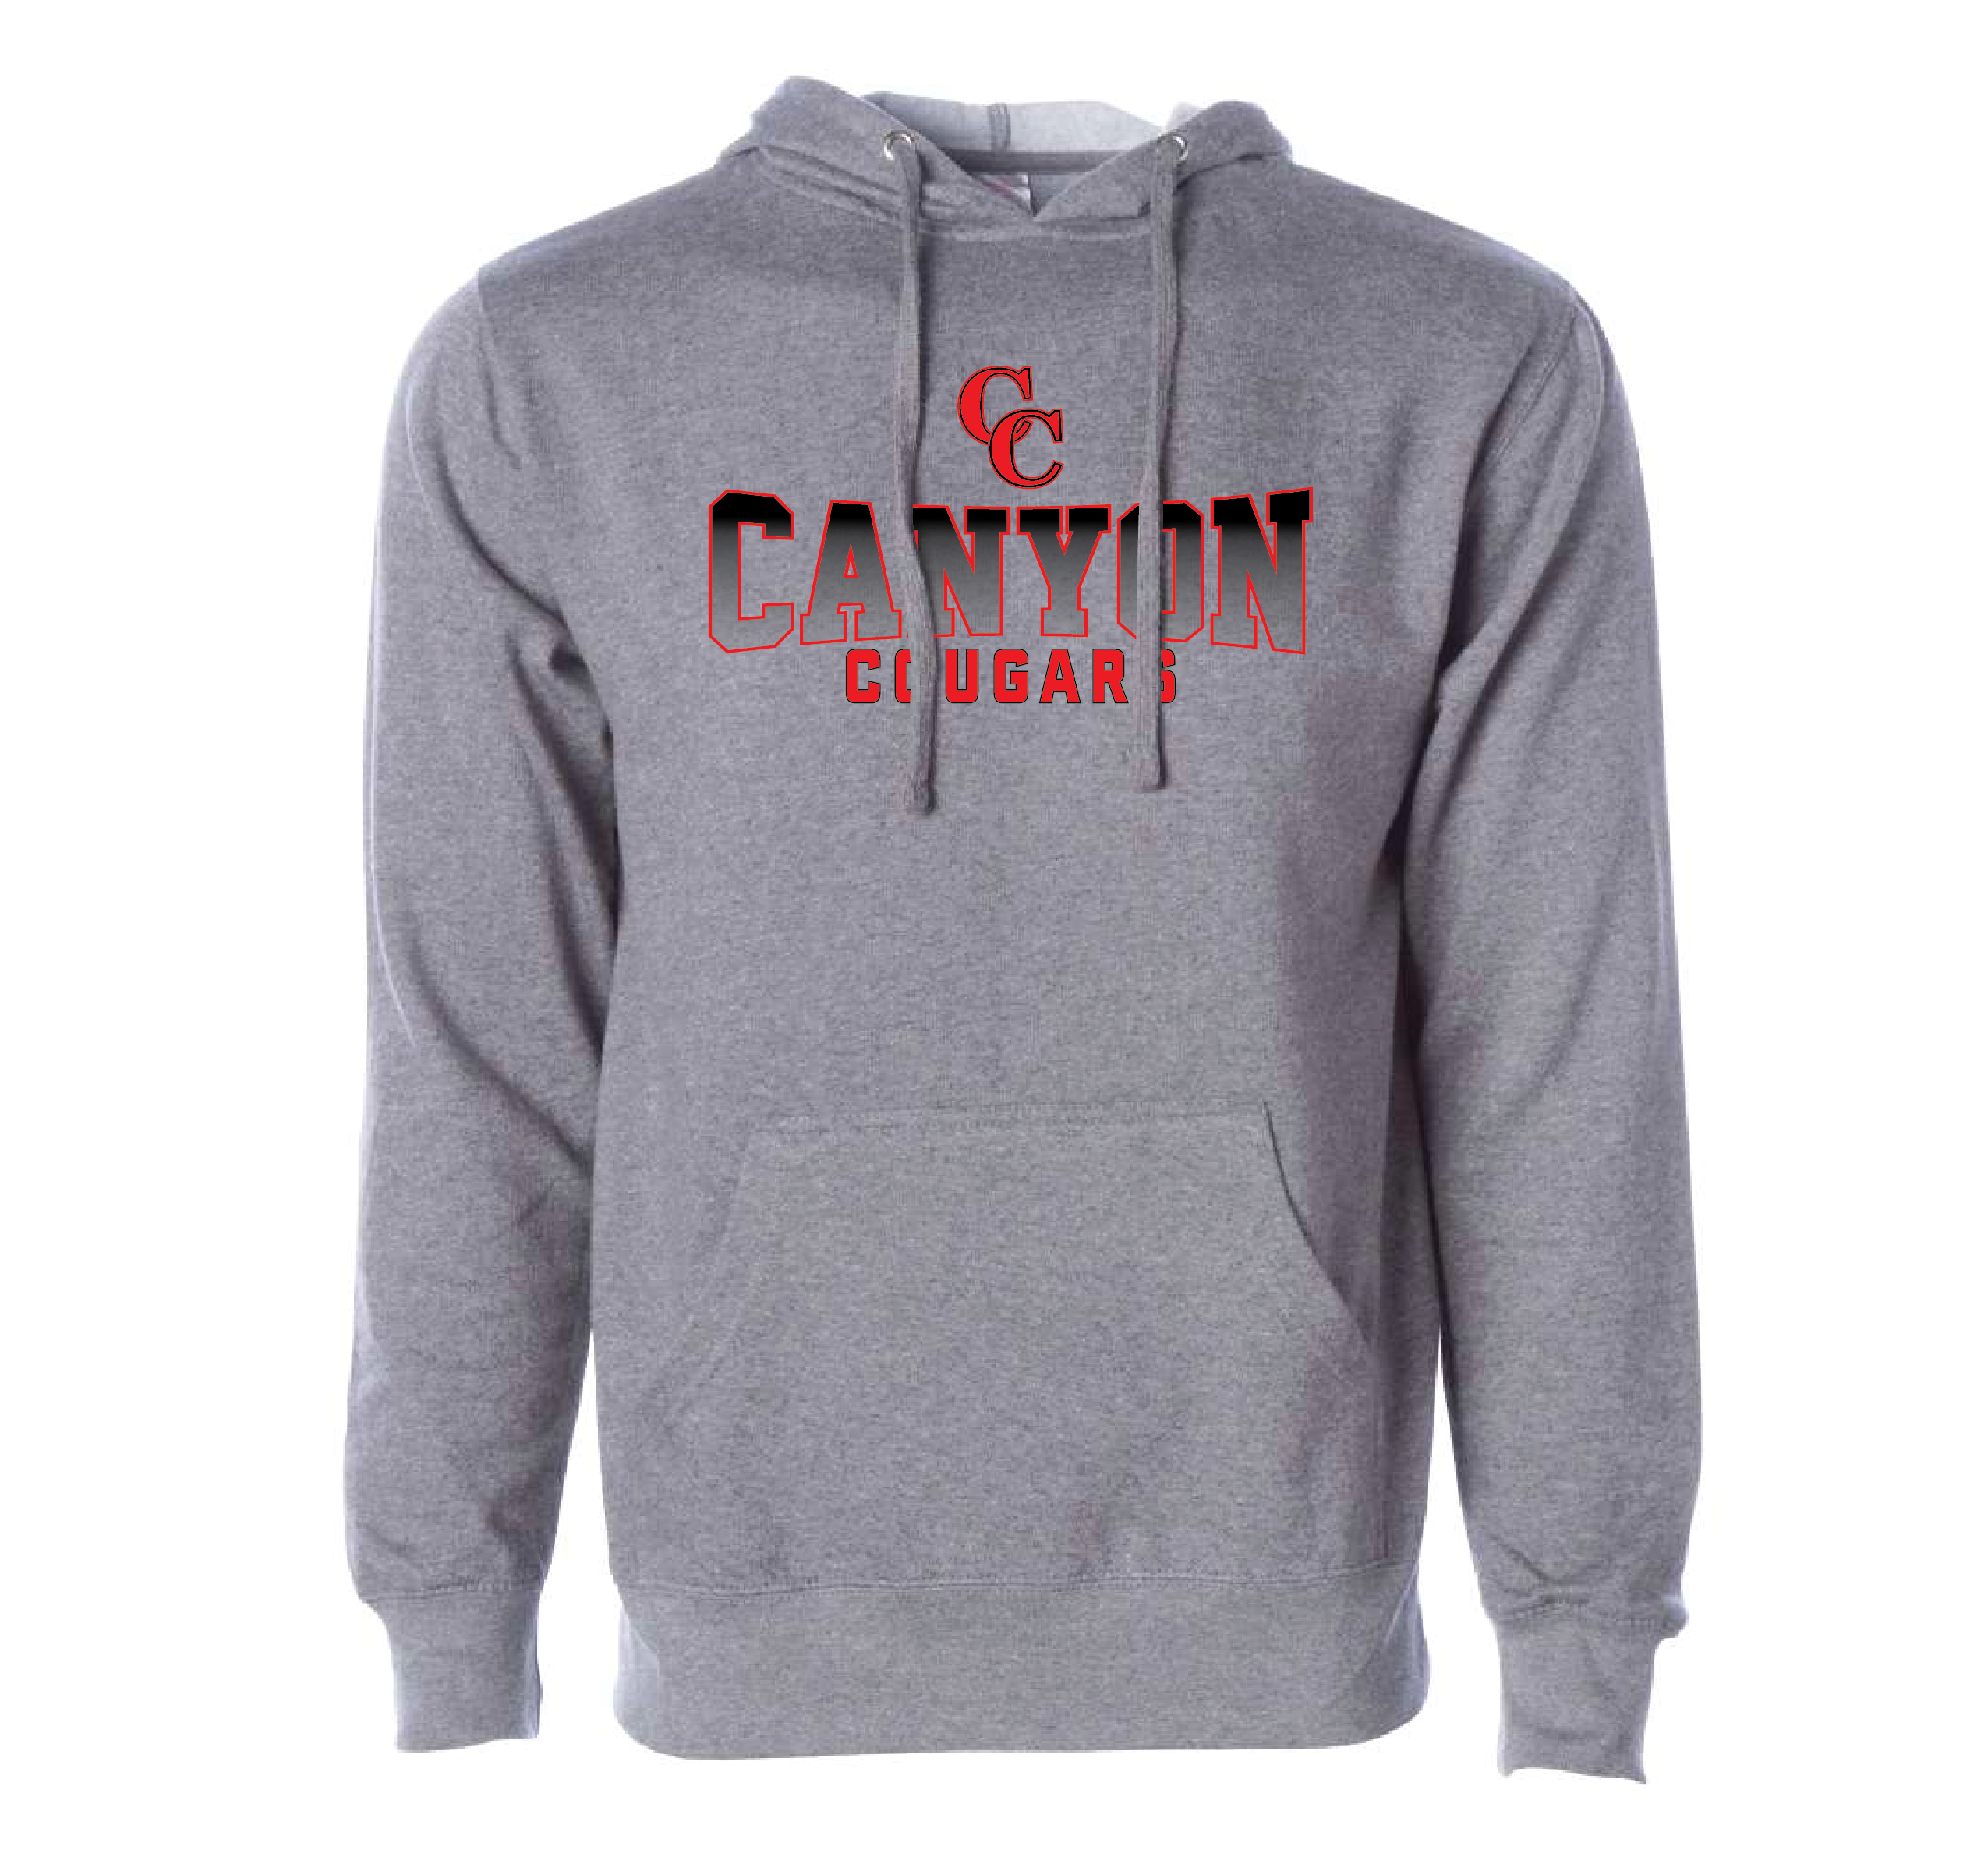 Gradient Canyon Cougars Hoodie